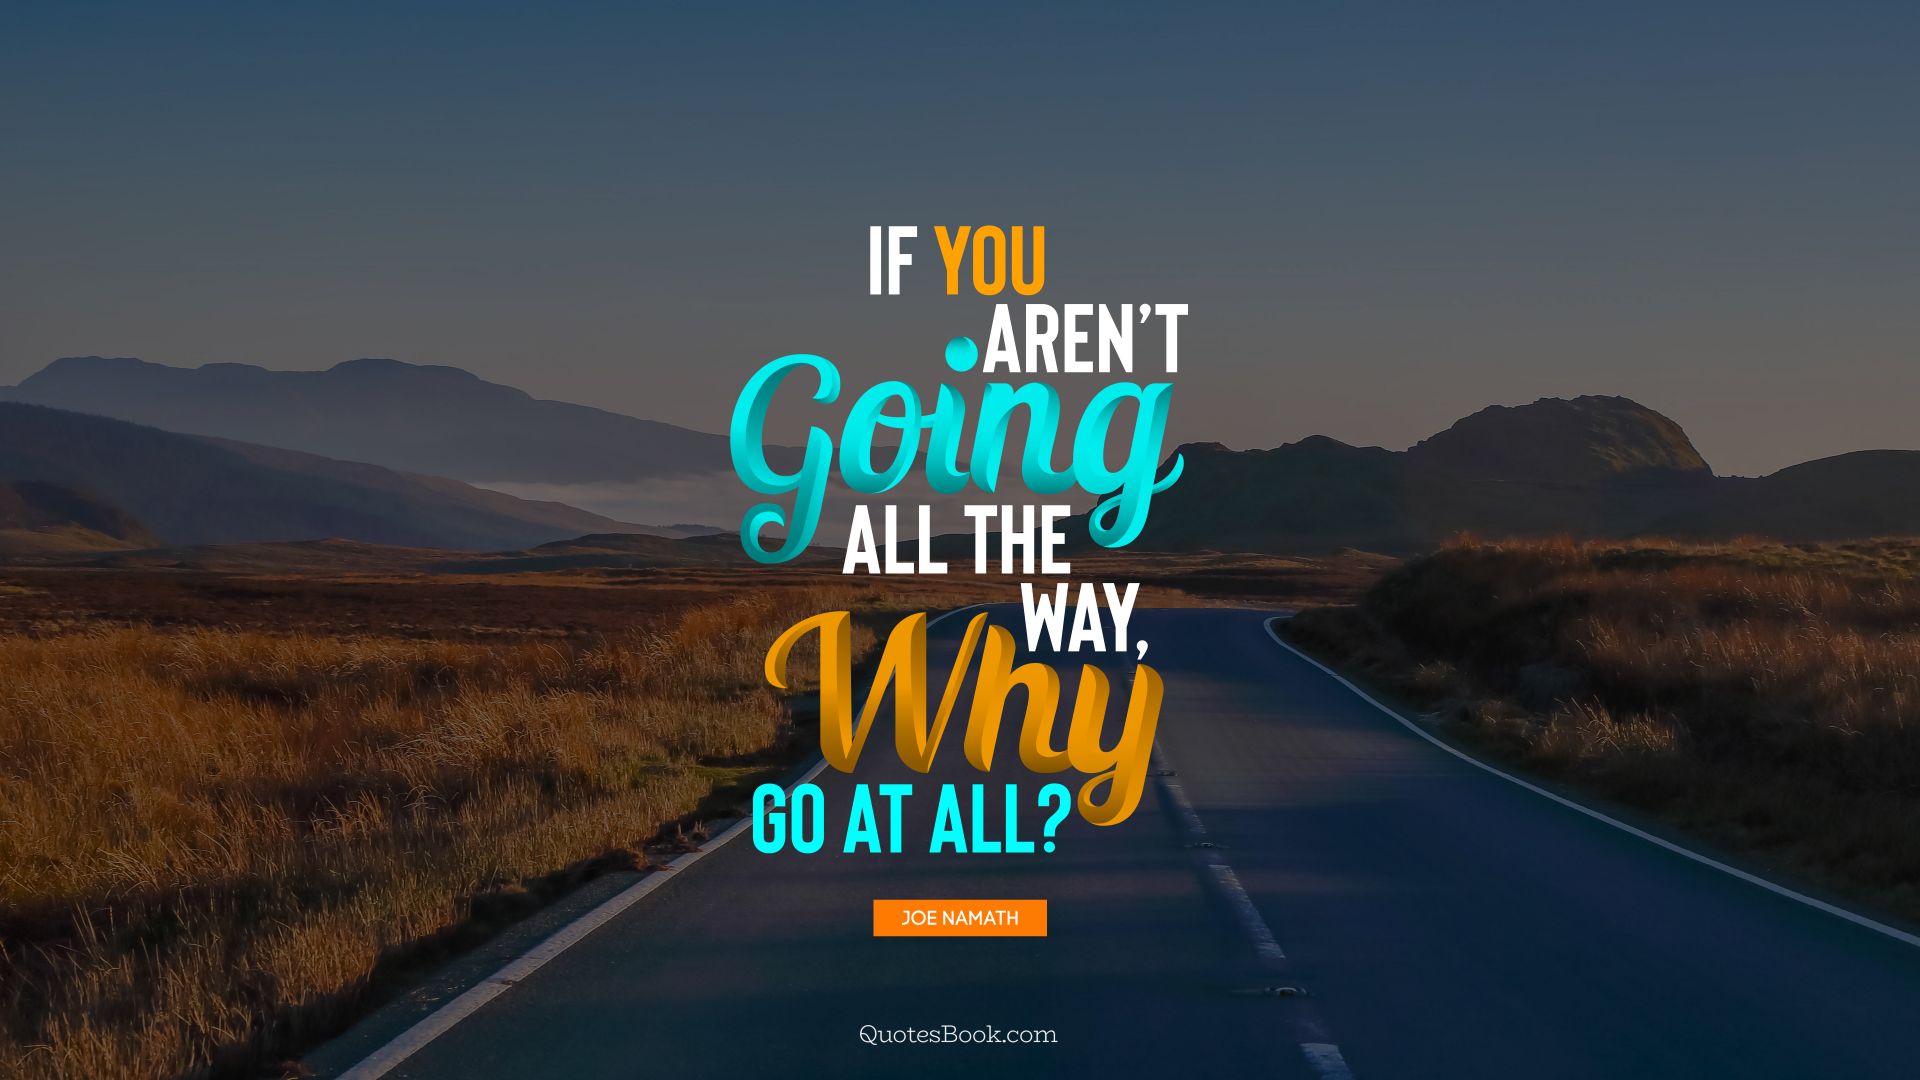 If you aren’t going all the way, why go at all?. - Quote by Joe Namath